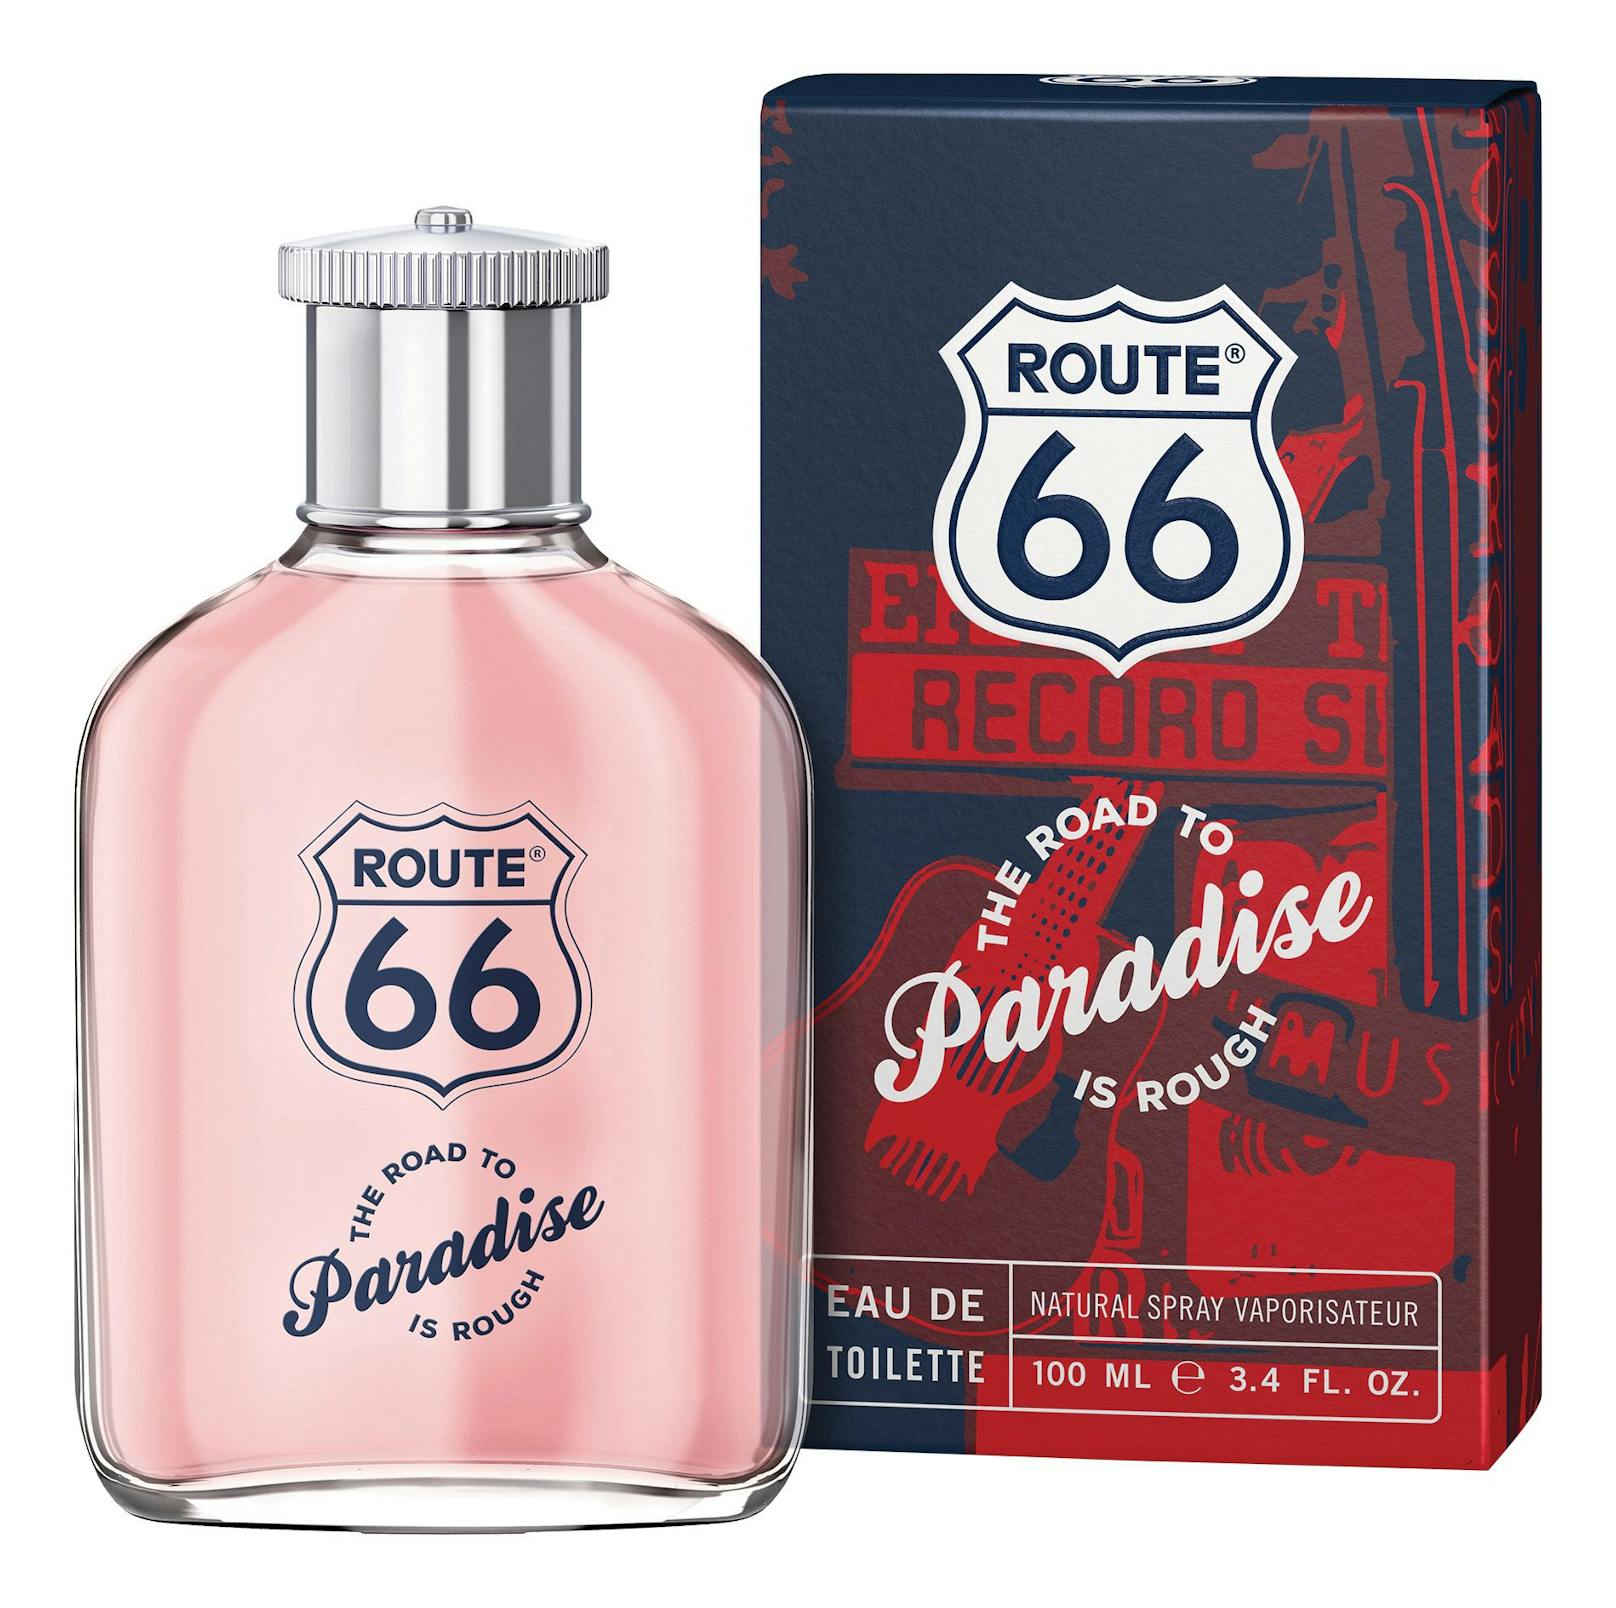 Duft "The Road To Paradise" von Route 66